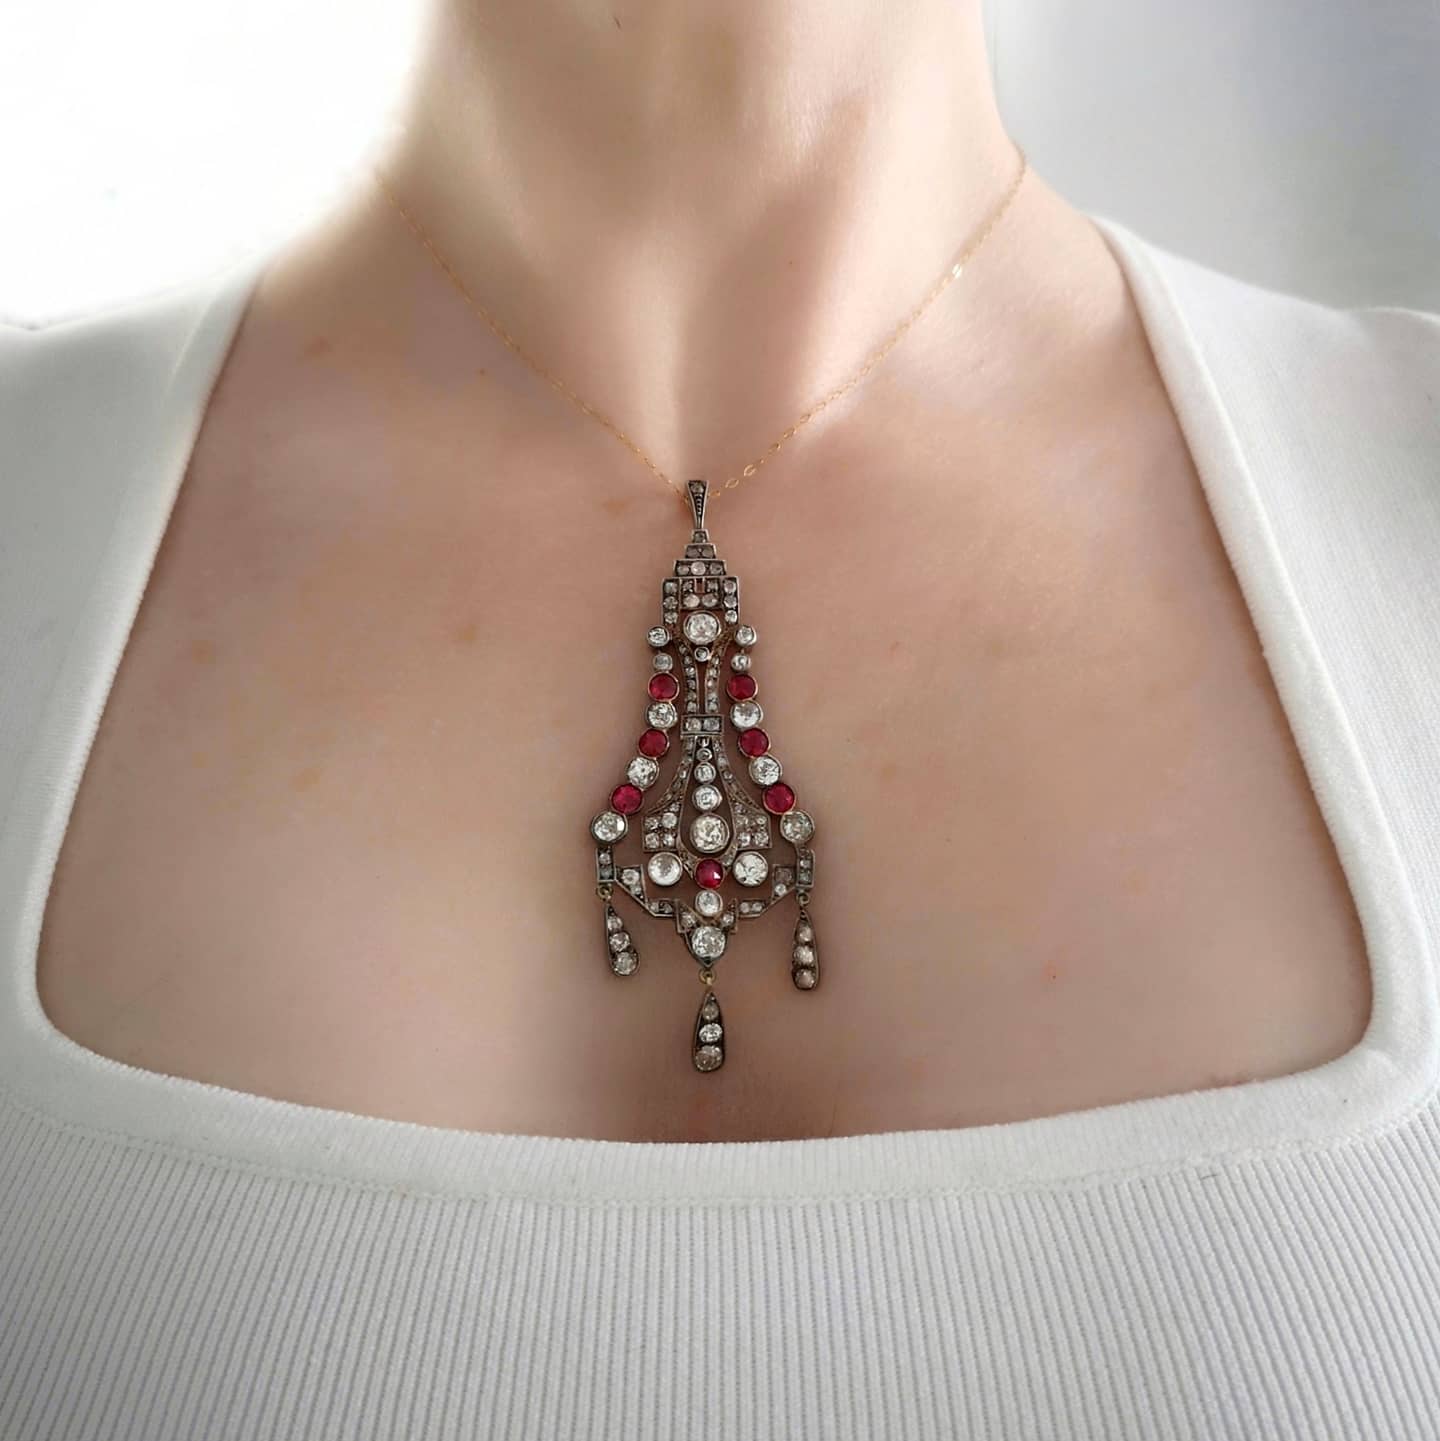 The roaring 20's diamond and ruby chandelier pendant